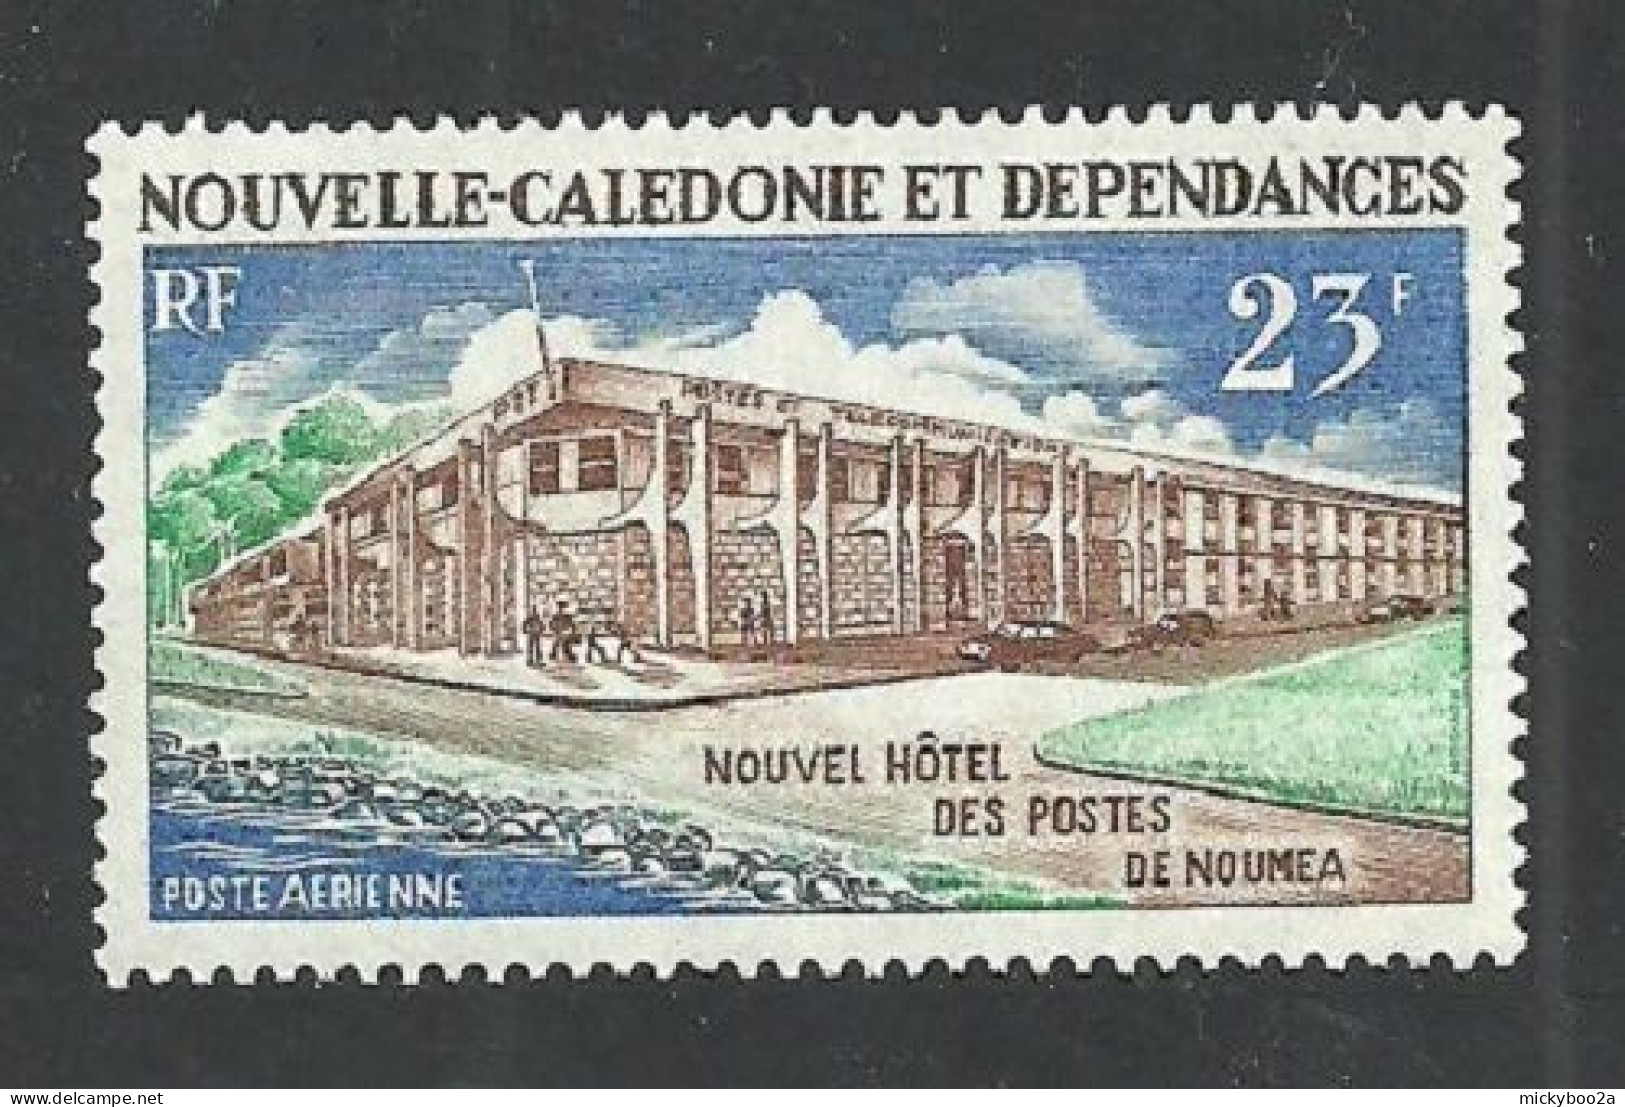 NEW CALEDONIA 1972 POST OFFICE SET MOUNTED MINT - Usados